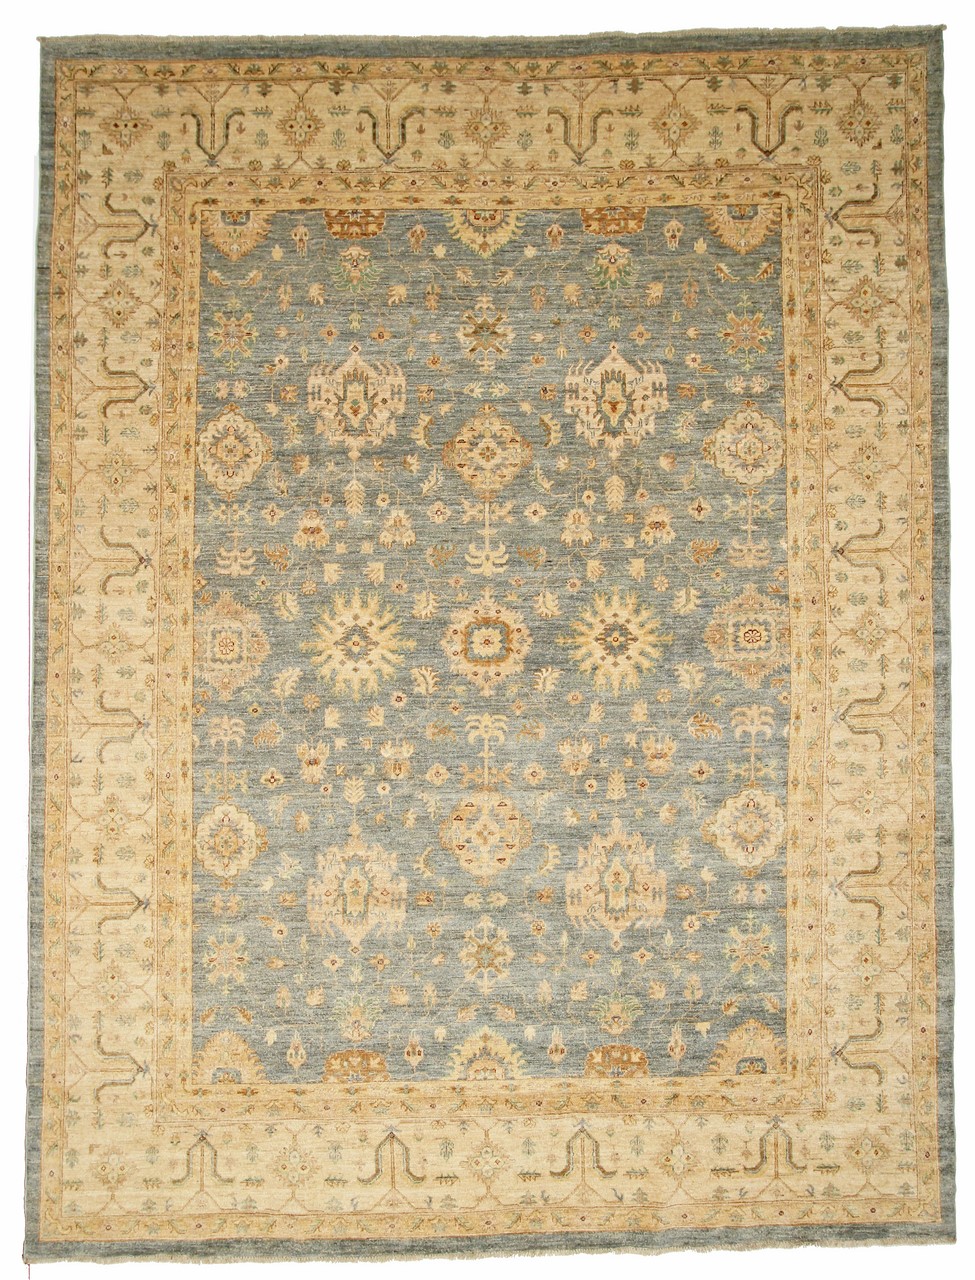 Pakistani rug Ziegler Farahan 360x272 360x272, Persian Rug Knotted by hand